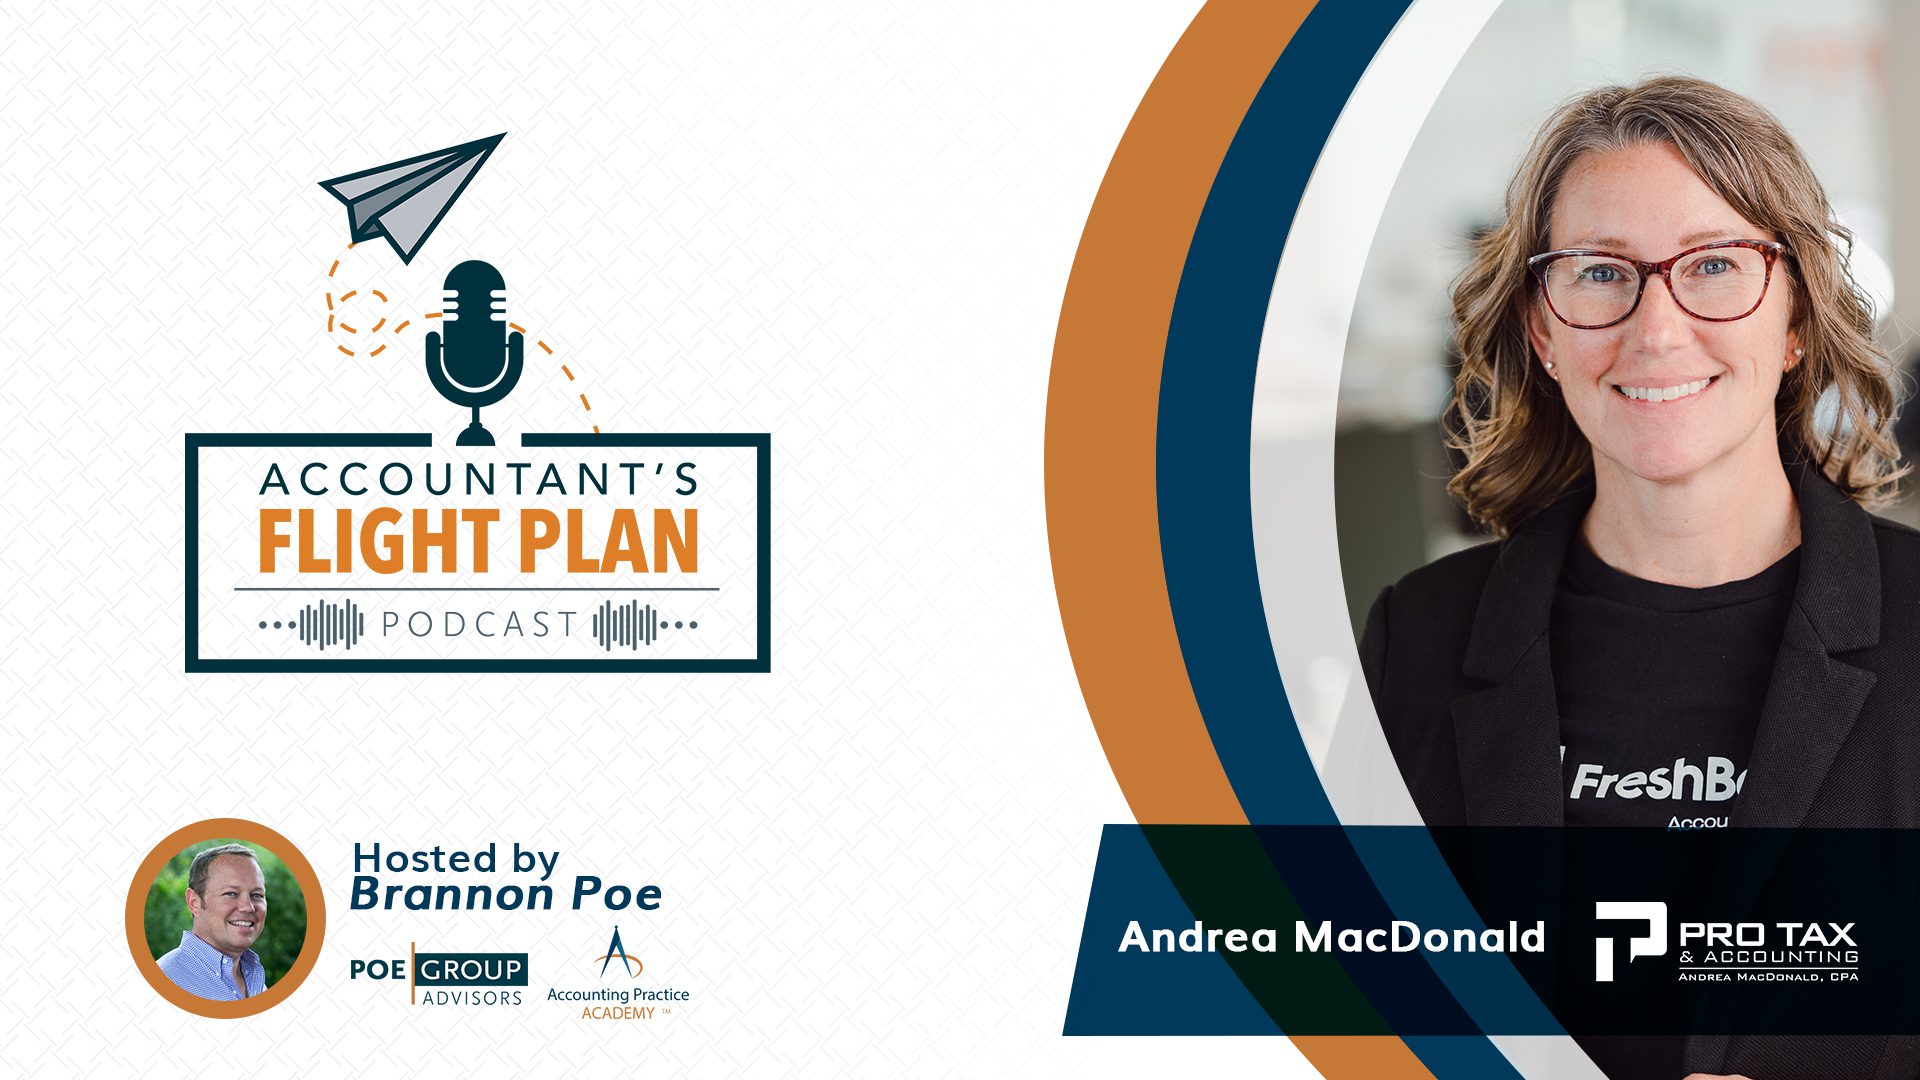 Accountant's Flight Plan Podcast with Guest Andrea MacDonald